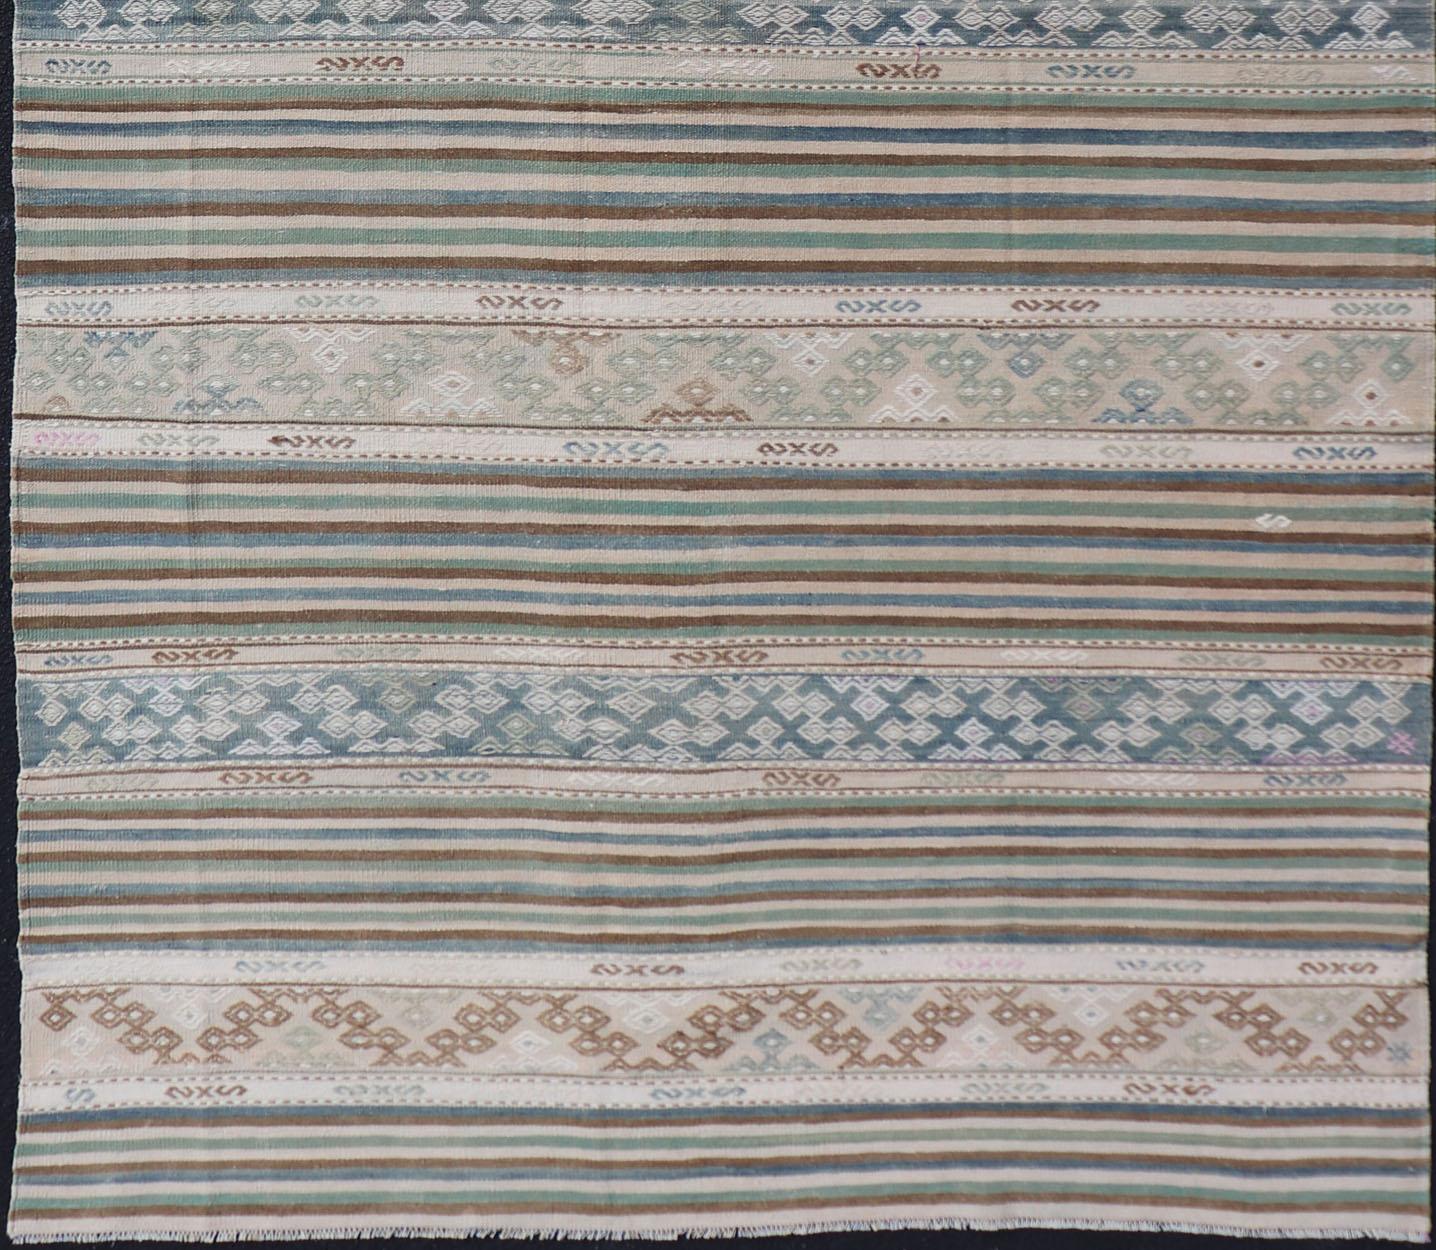 Turkish Flat-Weave Kilim with Stripes and Embroideries In Blue, Green, and Cream For Sale 1